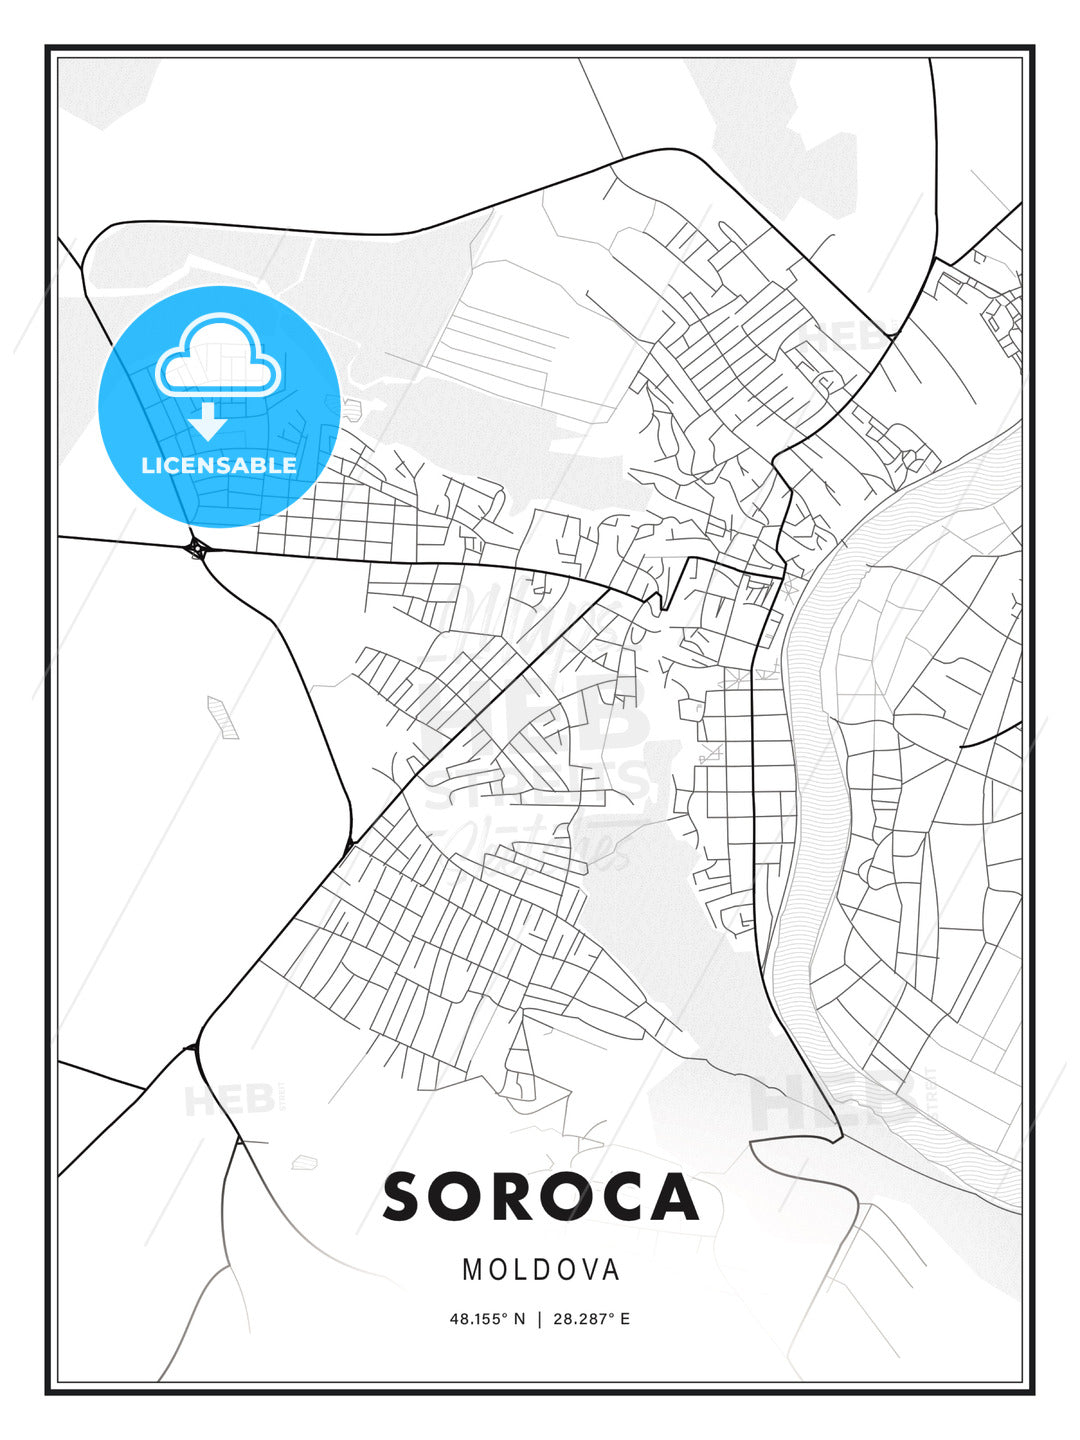 Soroca, Moldova, Modern Print Template in Various Formats - HEBSTREITS Sketches